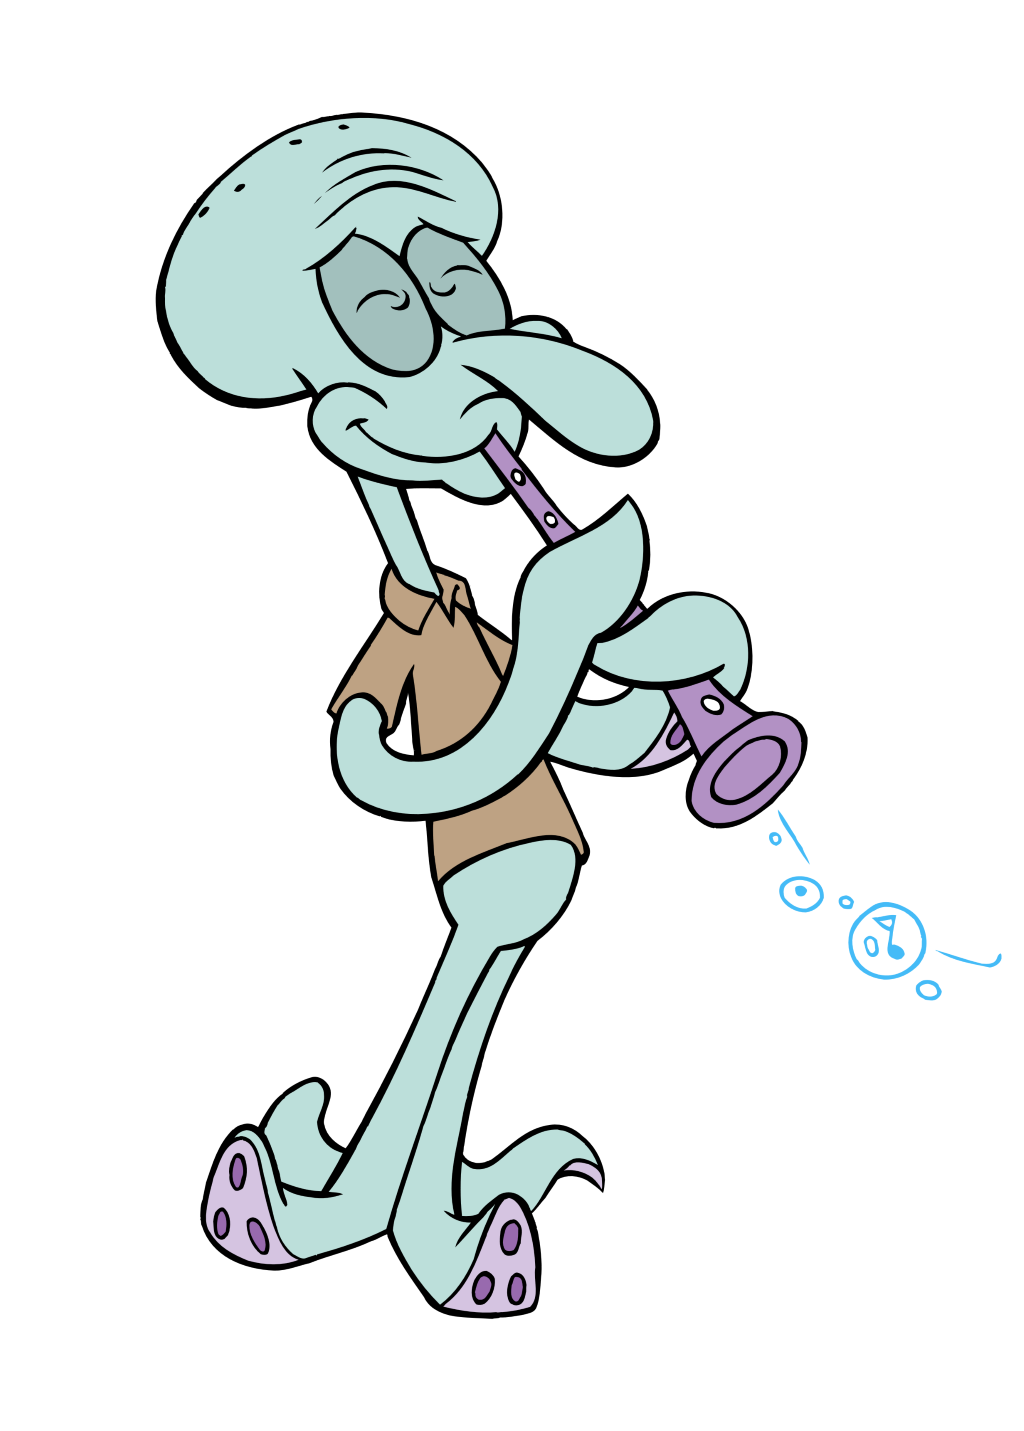 Squidward Tentacles image,picture, logo, .png